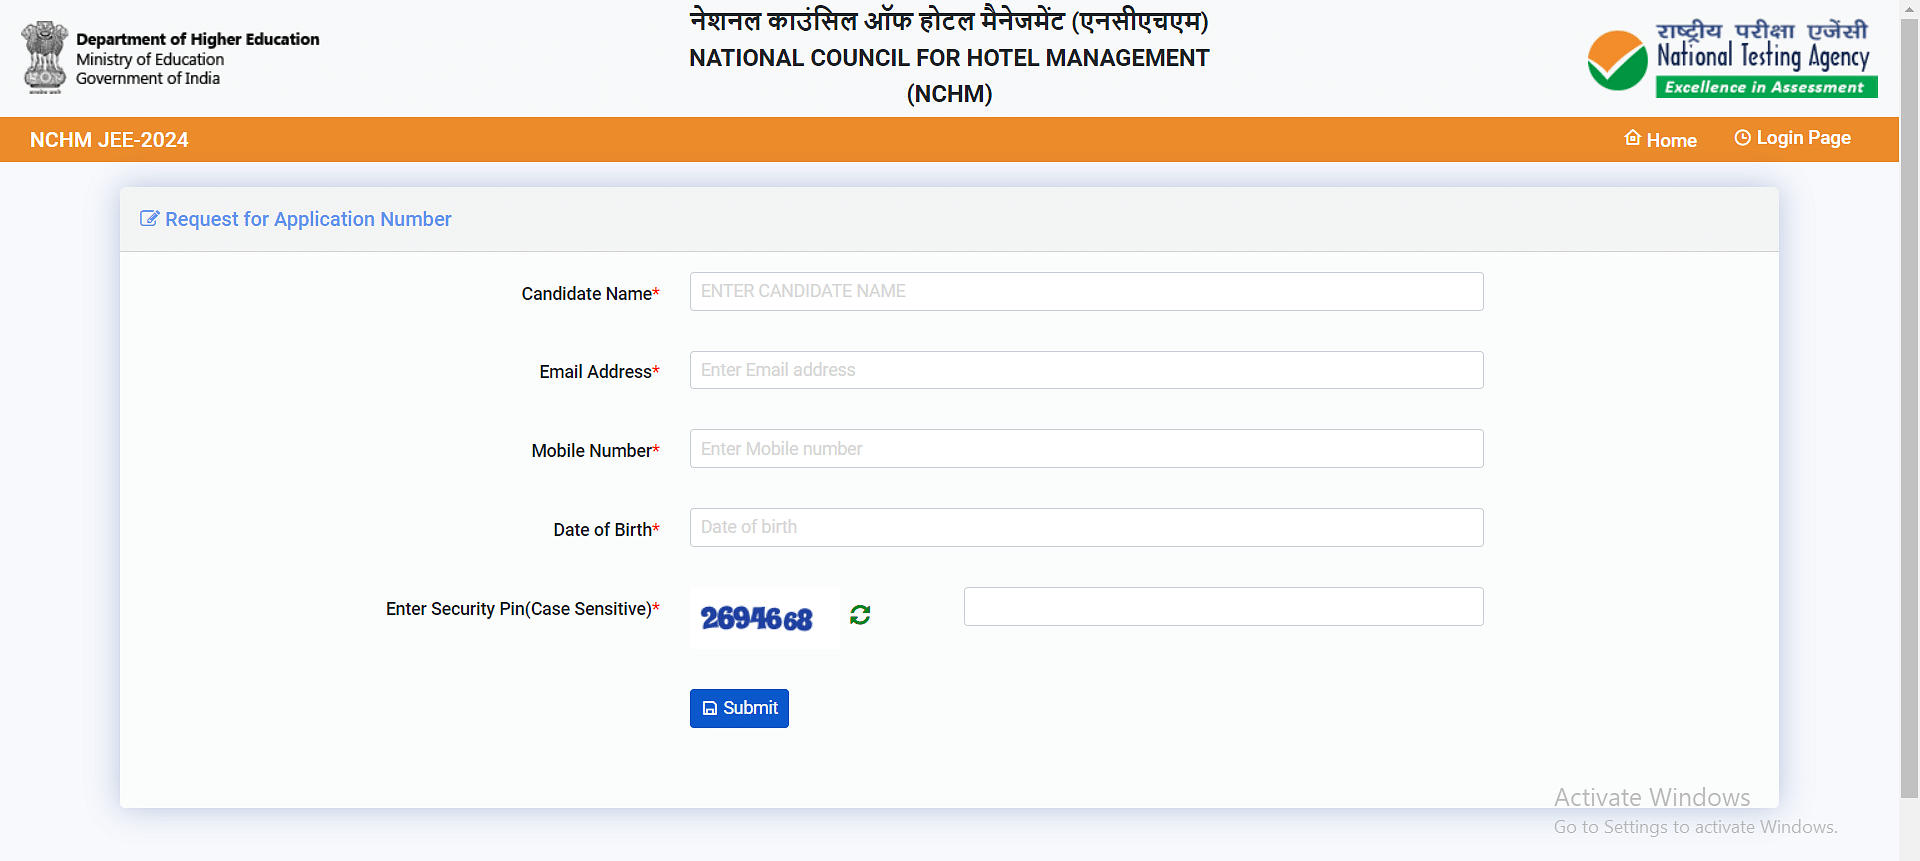 NCHMCT JEE 2024 LOGIN - APPLICATION NUMBER